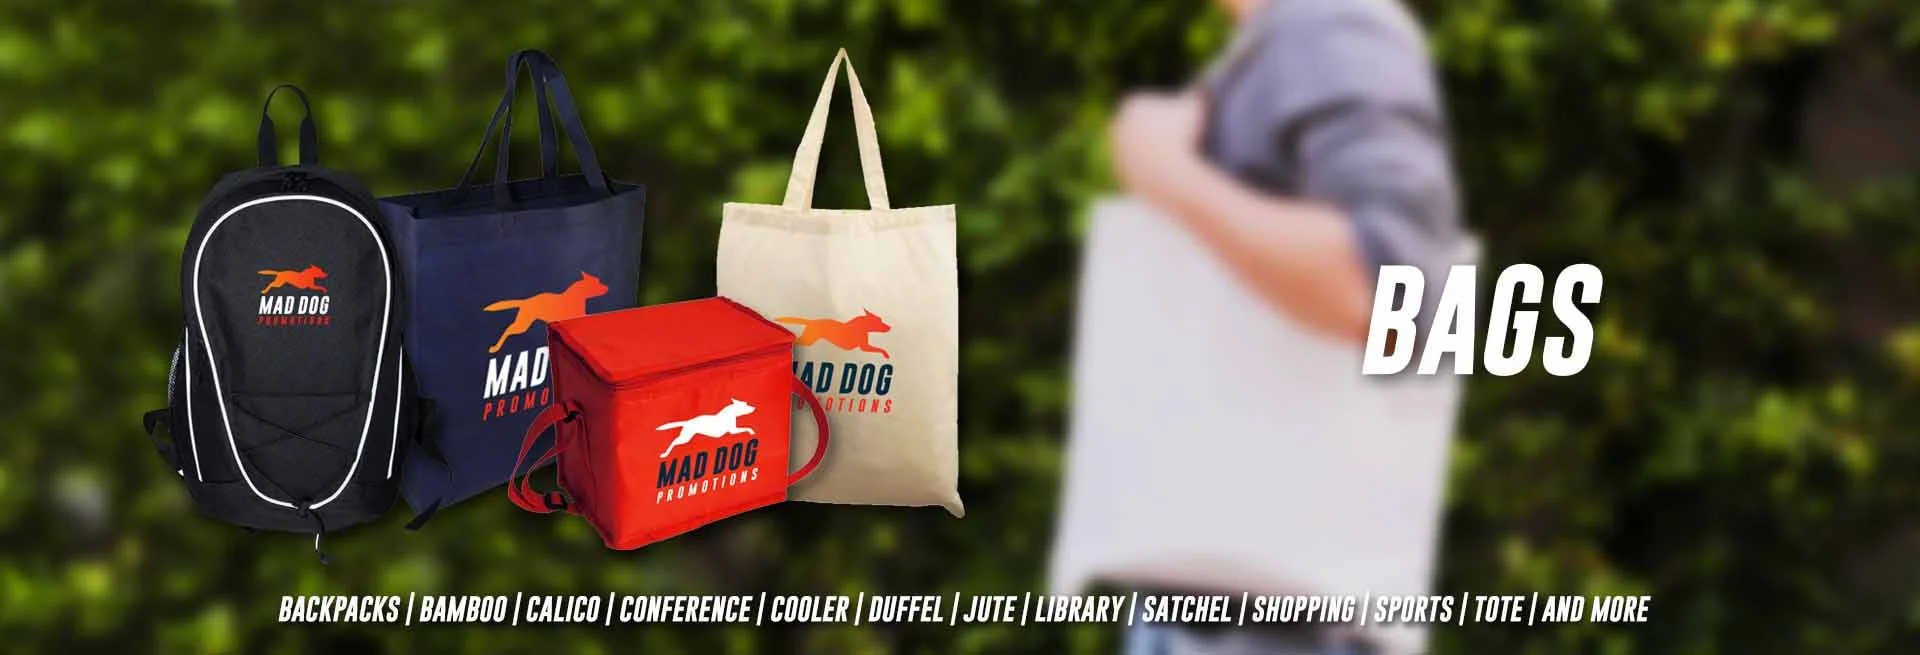 Custom Printed Bags Online in Perth - Mad Dog Promotions